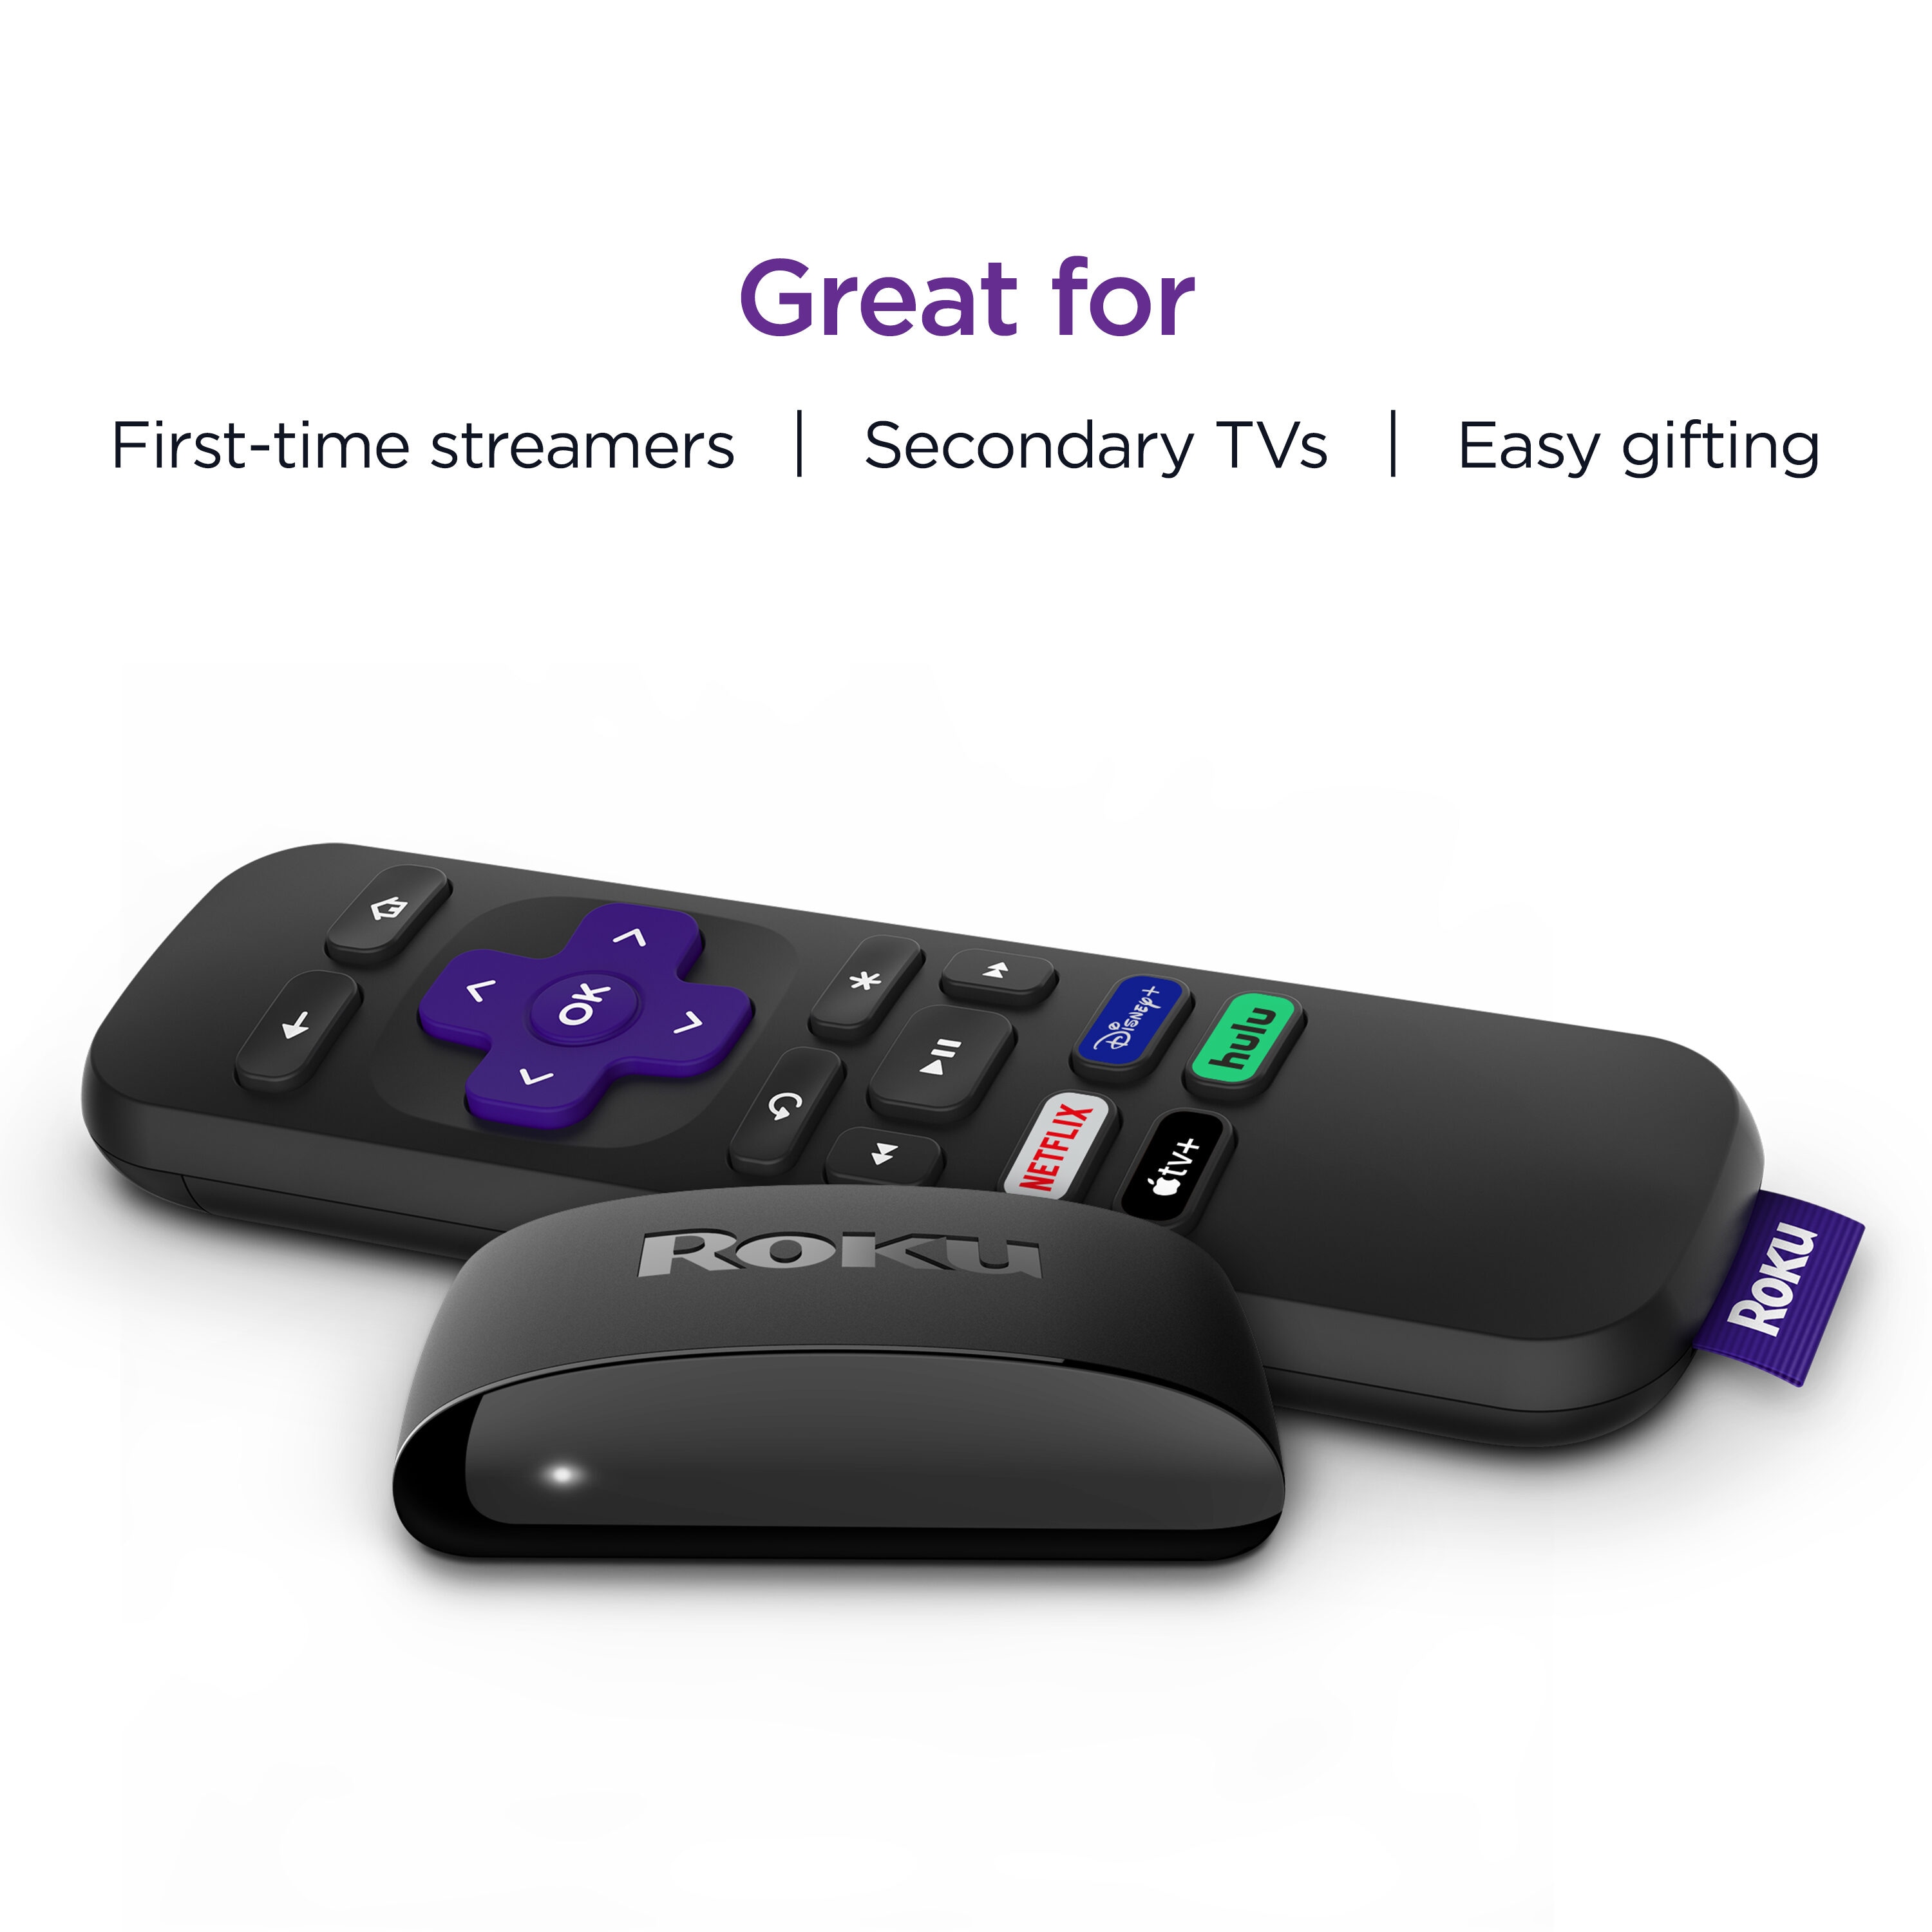 nødvendighed sigte tidligste Roku Express Hd Streaming Device with Remote Control Included at Lowes.com